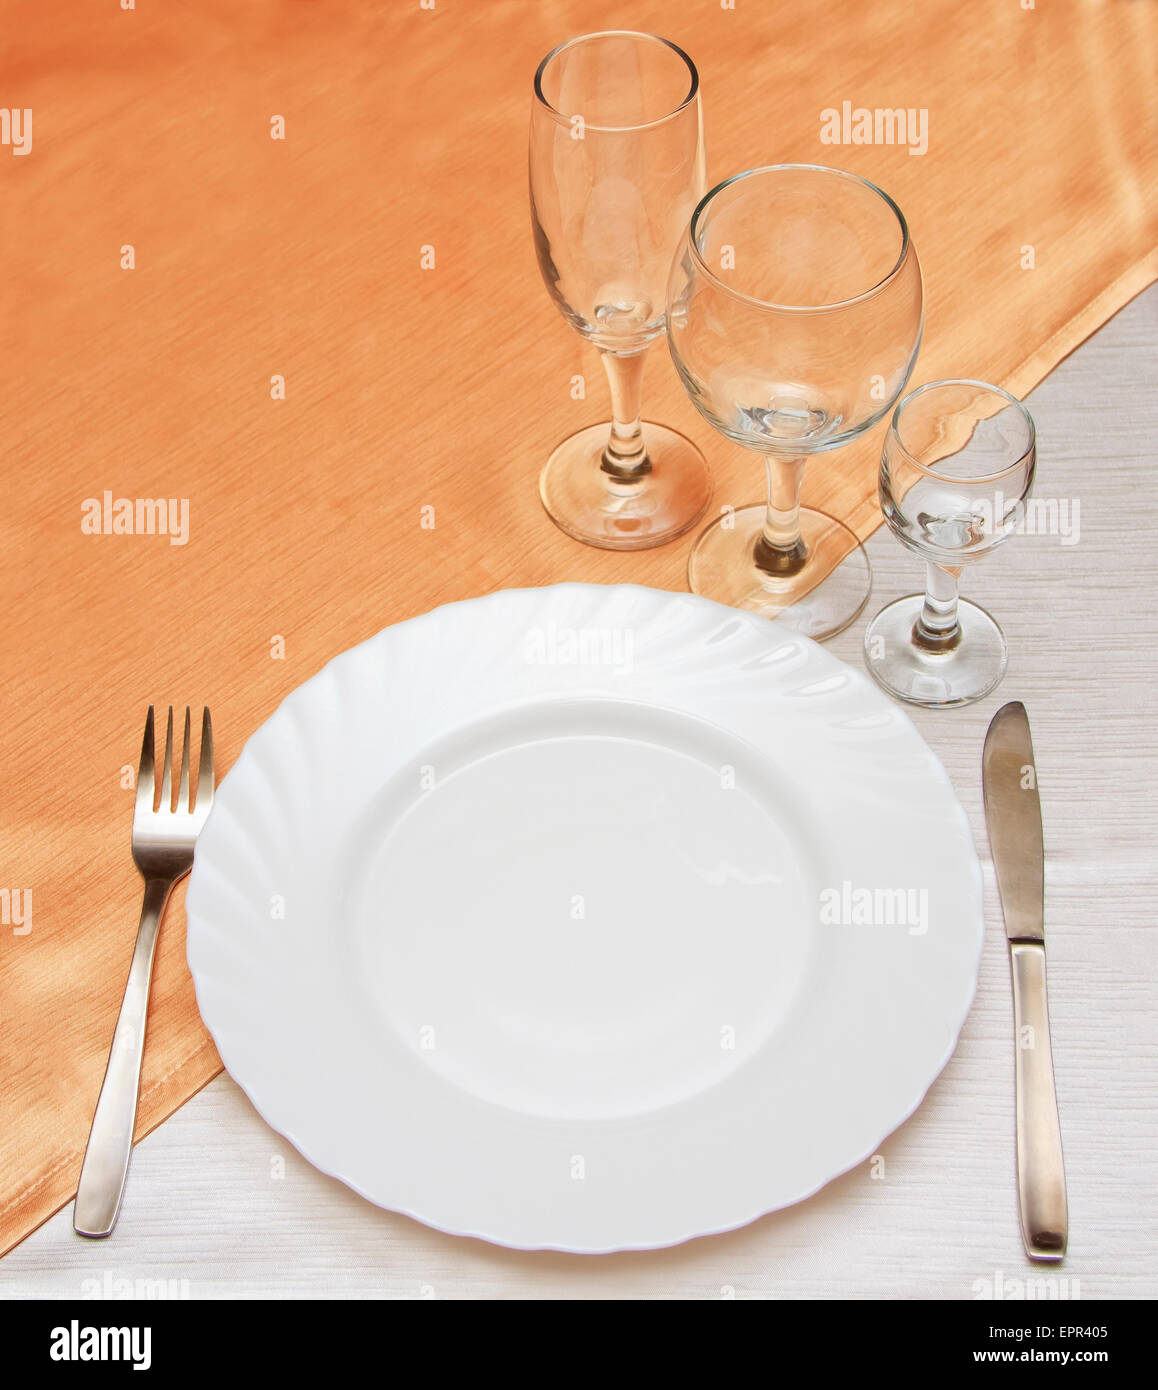 dinner plate, knife and fork Stock Photo